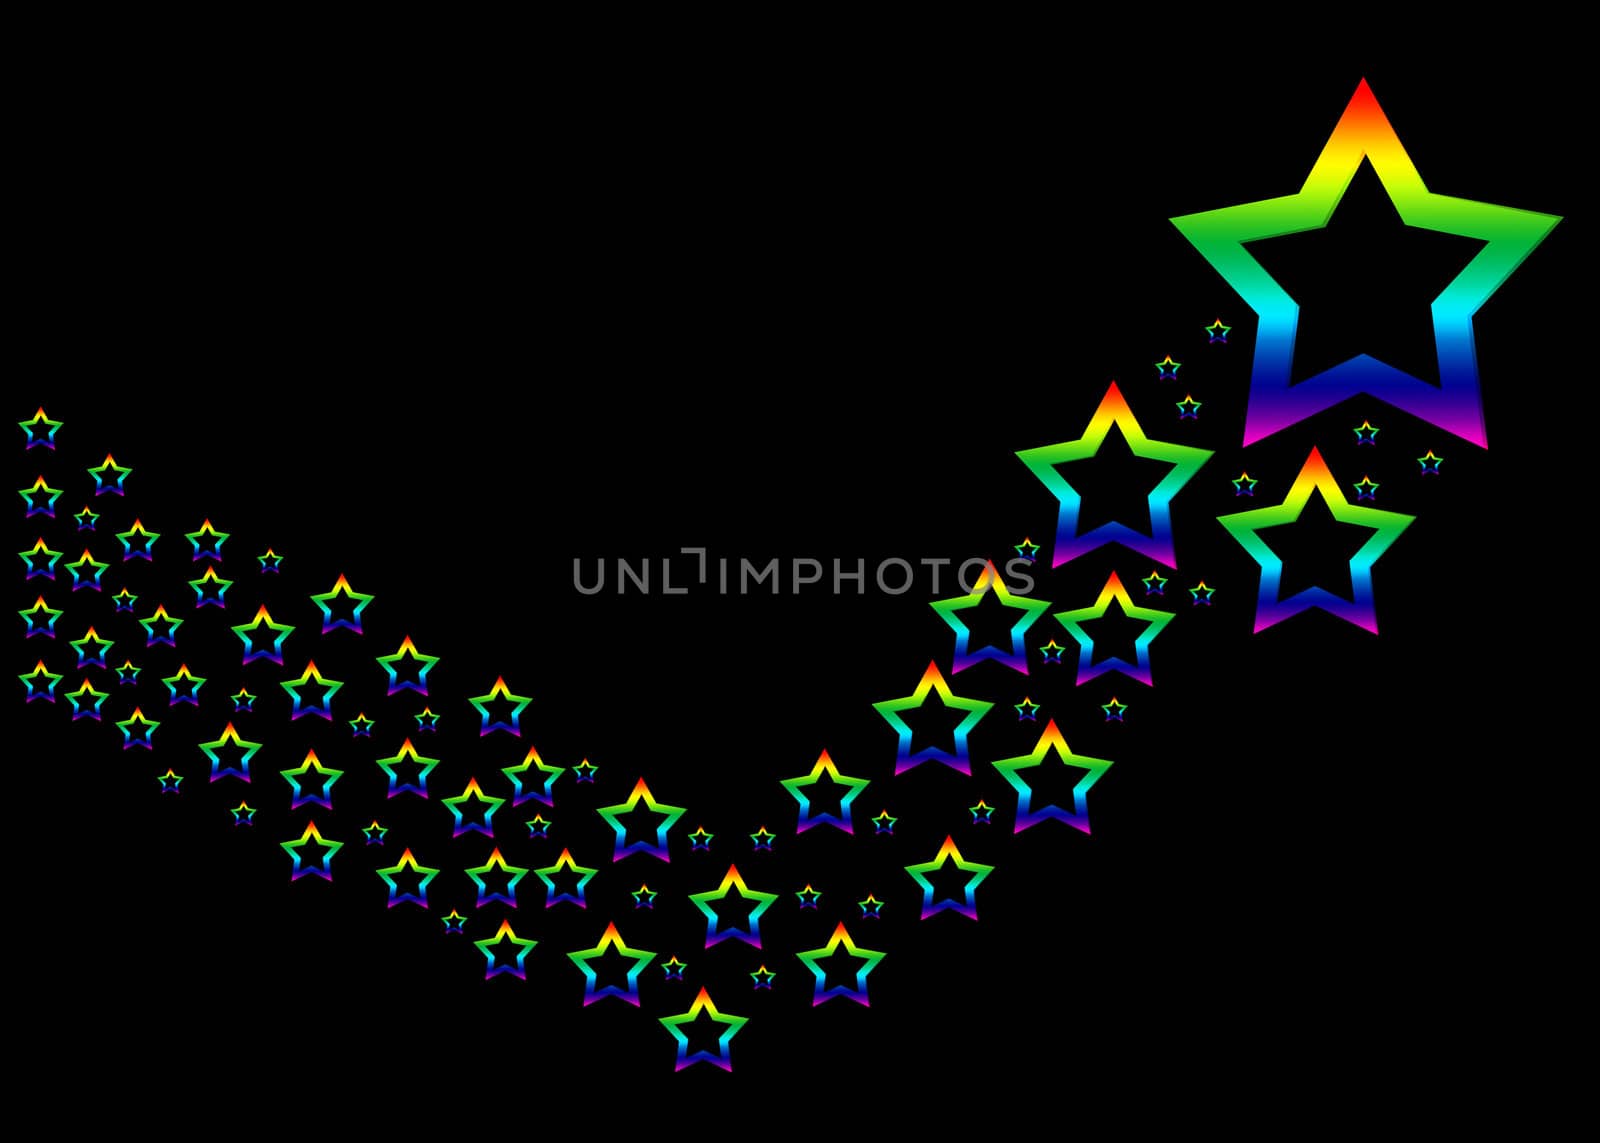 Many colorful rainbow stars on a black background